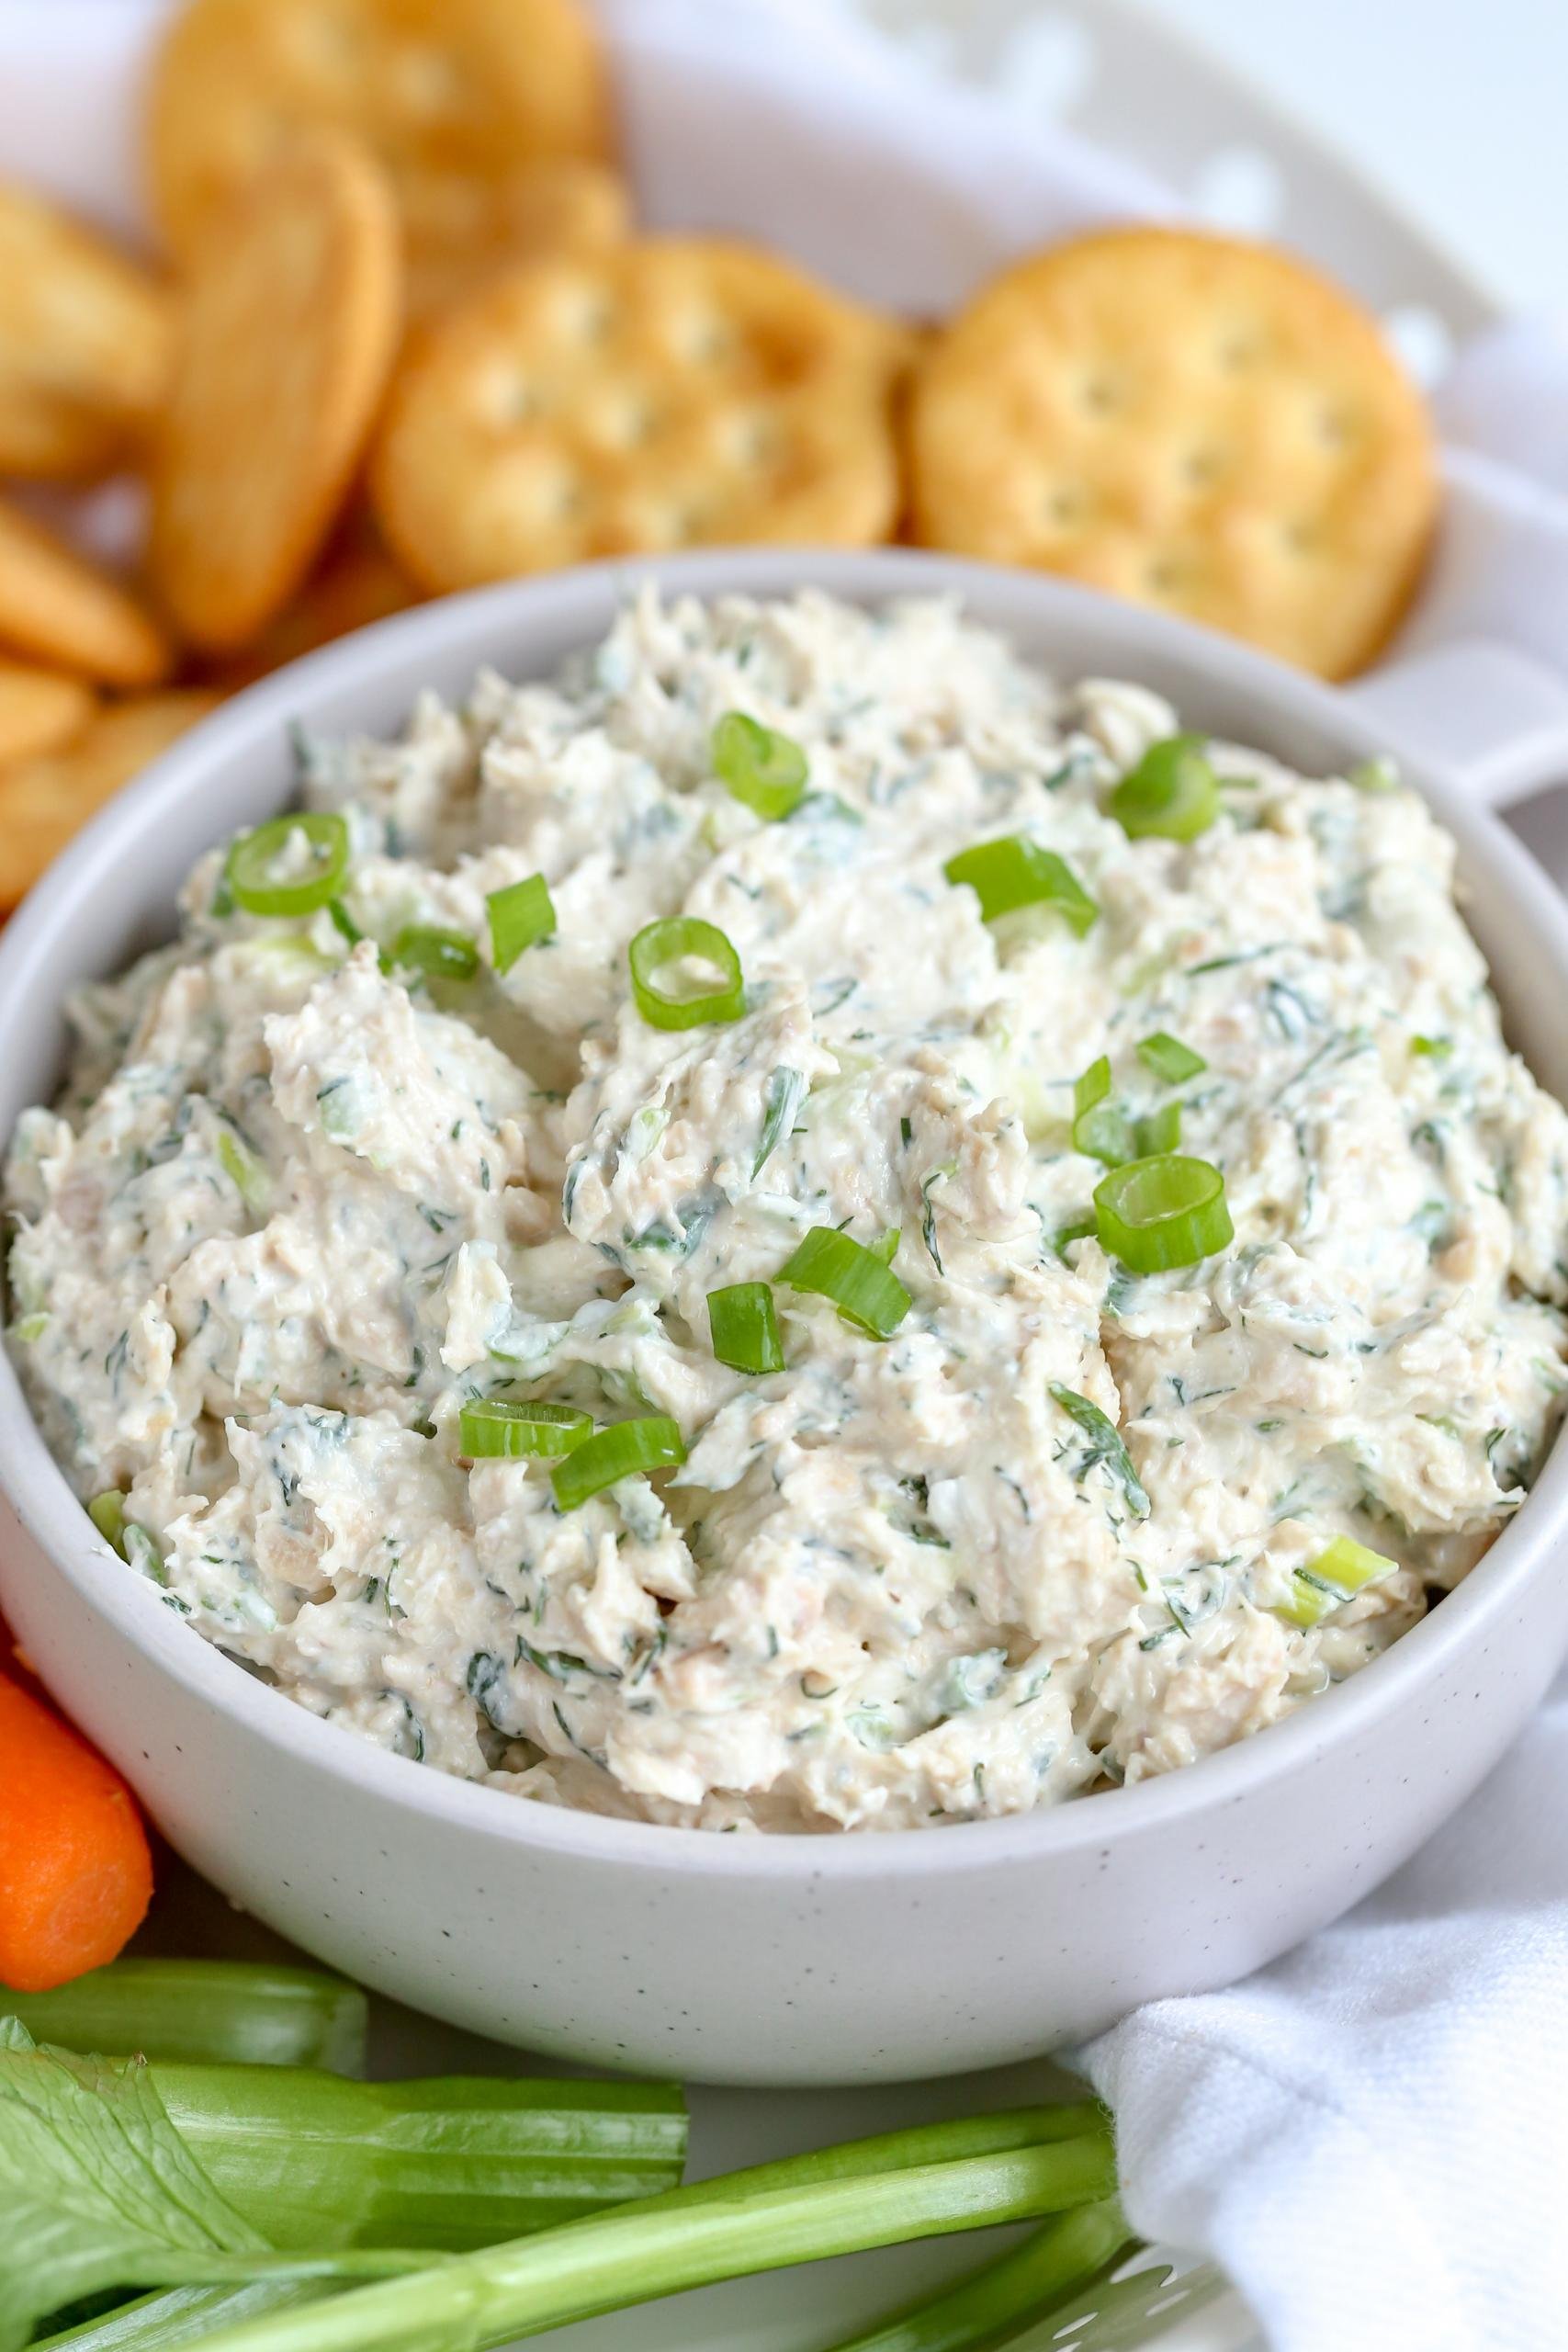 15 Minute Canned Salmon Dip Video Momsdish